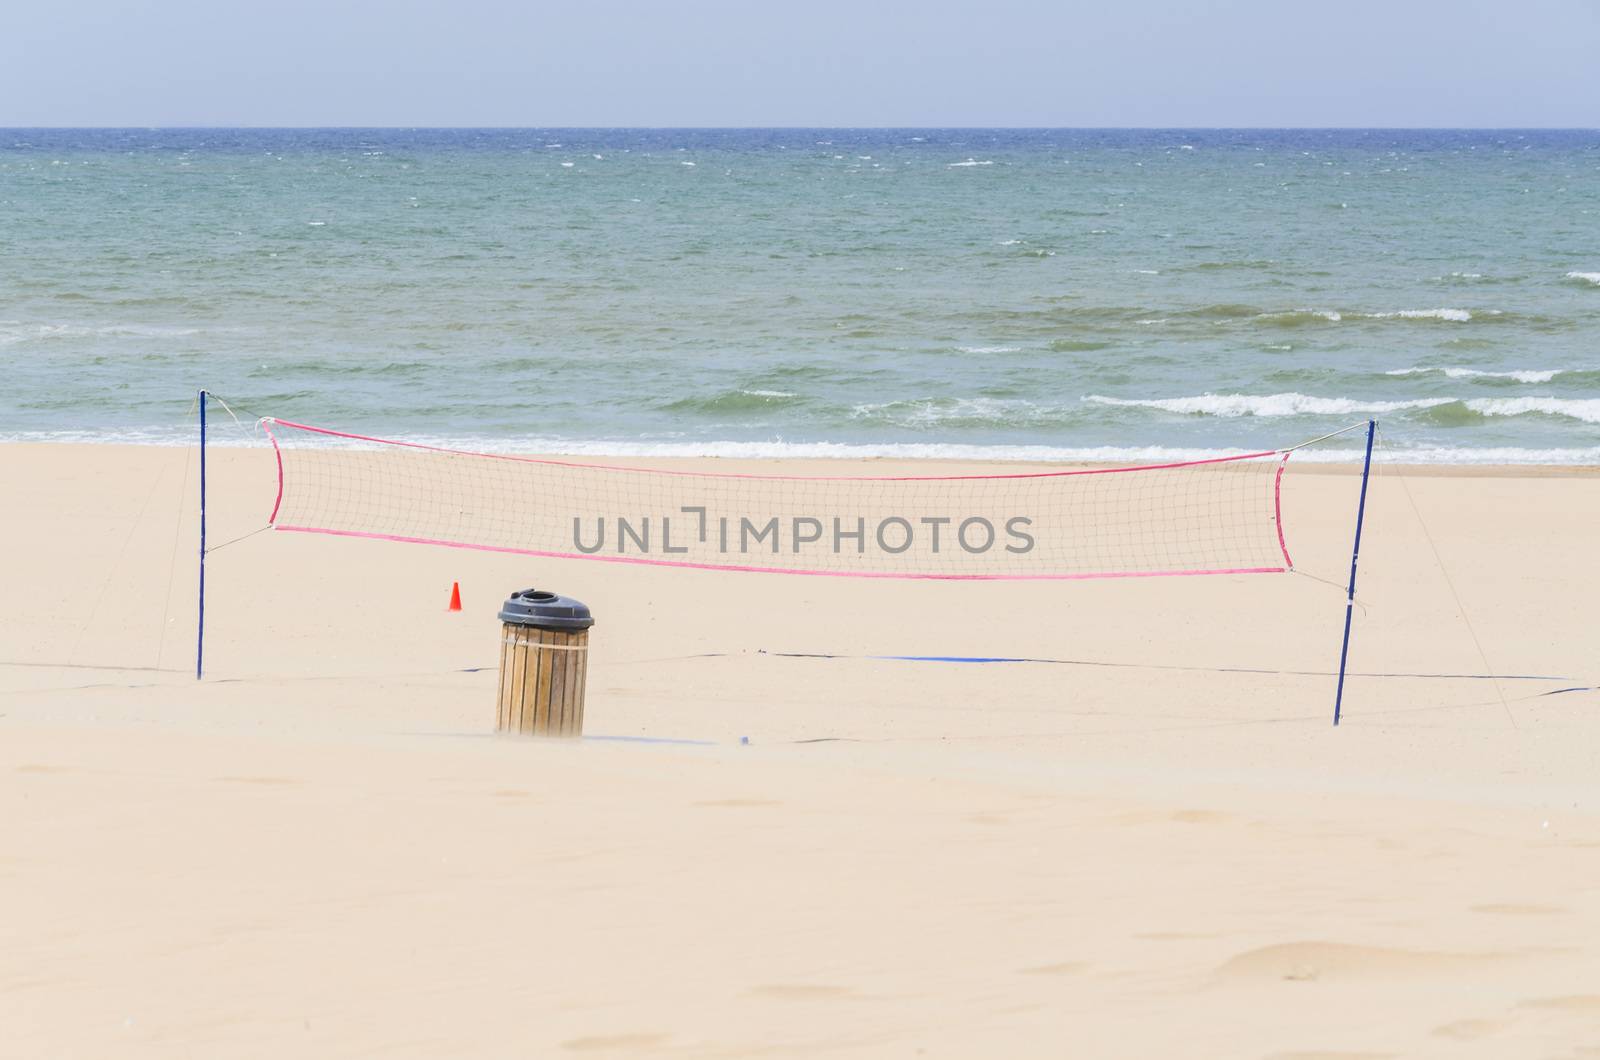  Deserted beach, volleyball net and dustbin by JFsPic